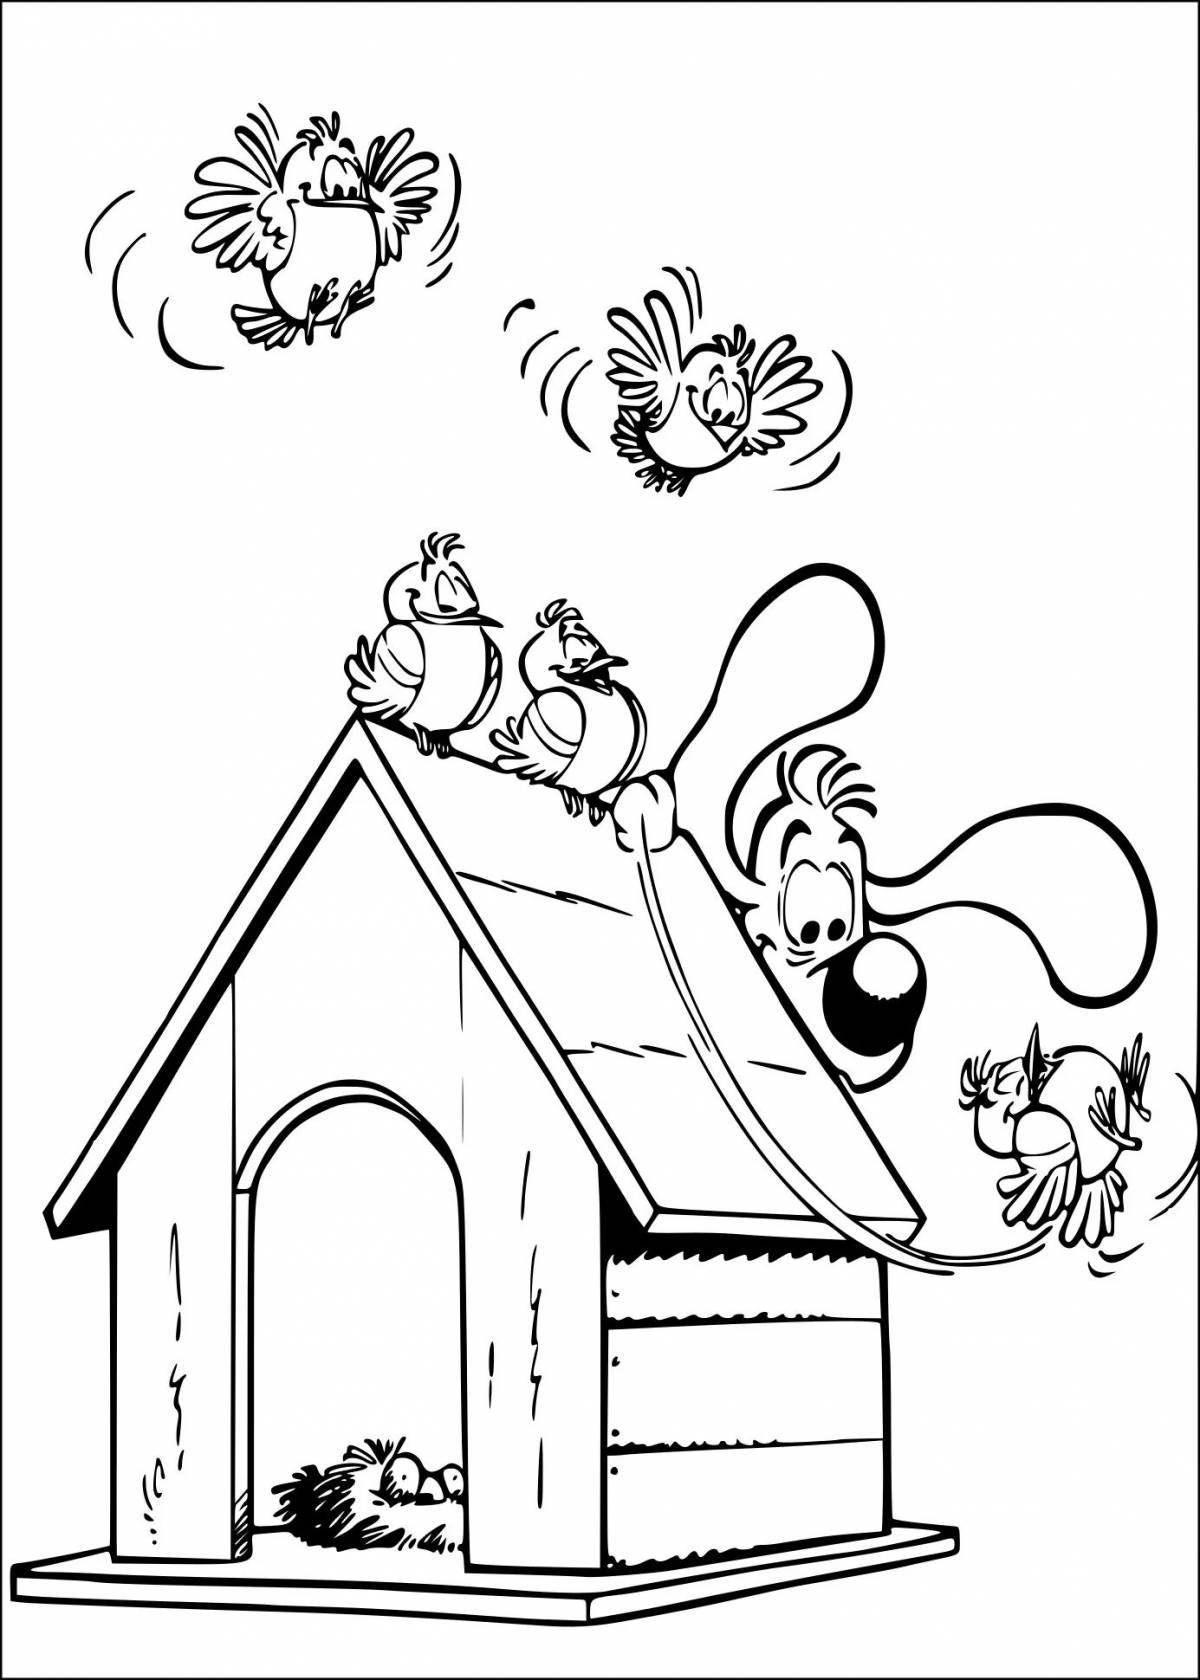 Impressive cat house coloring page for beginners